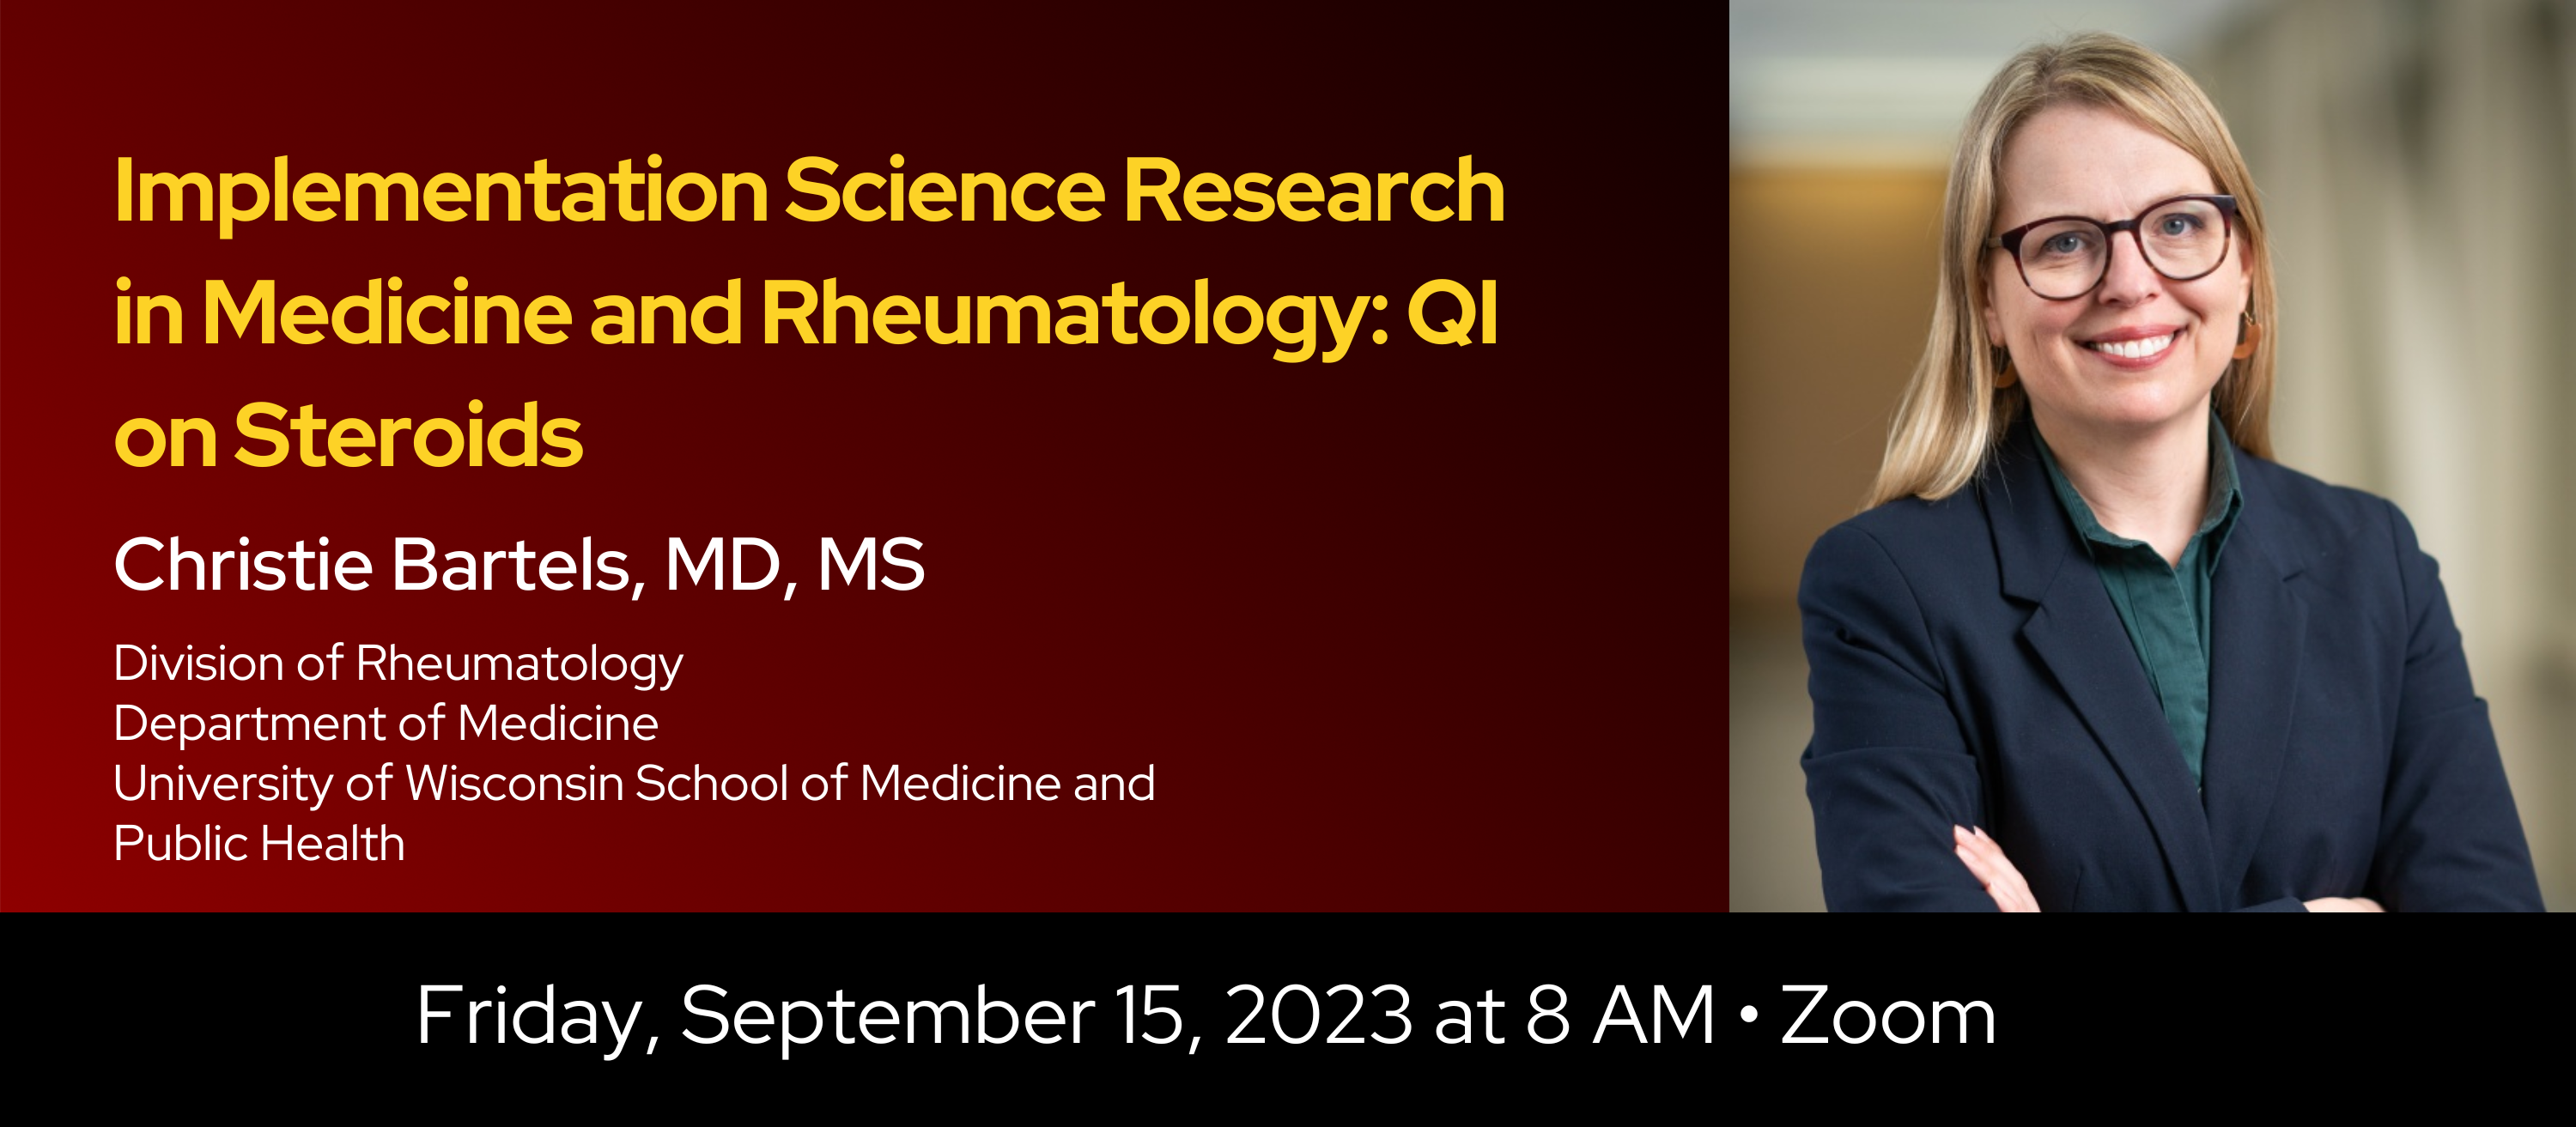 Title: Implementation Science Research in Medicine and Rheumatology: QI on Steroids